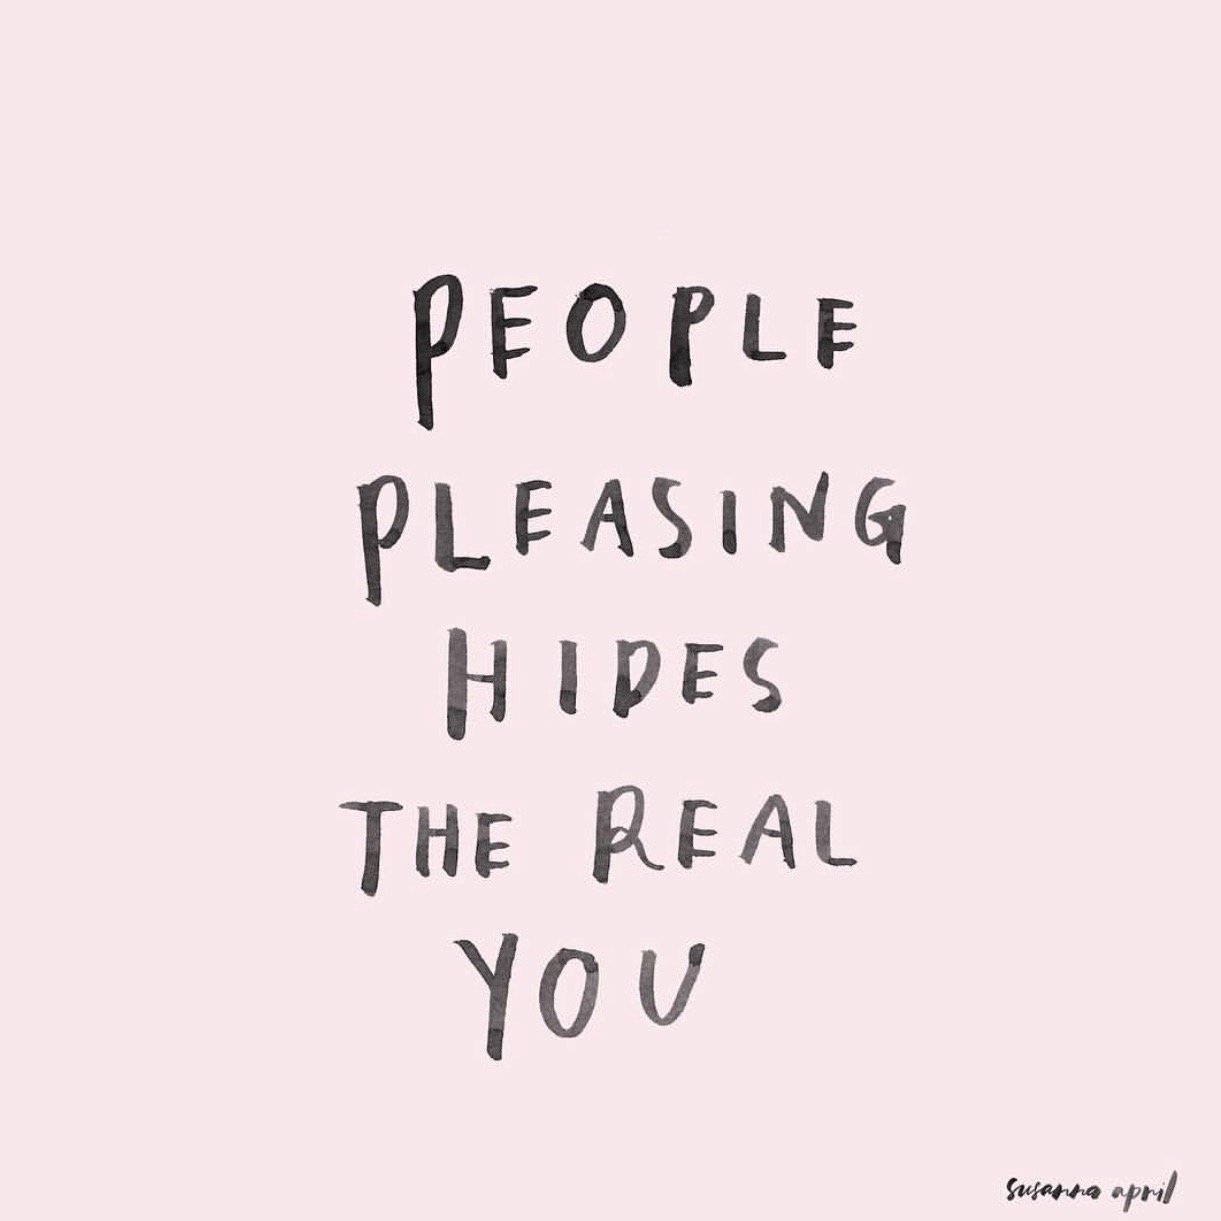 People pleasing hides the real you quote